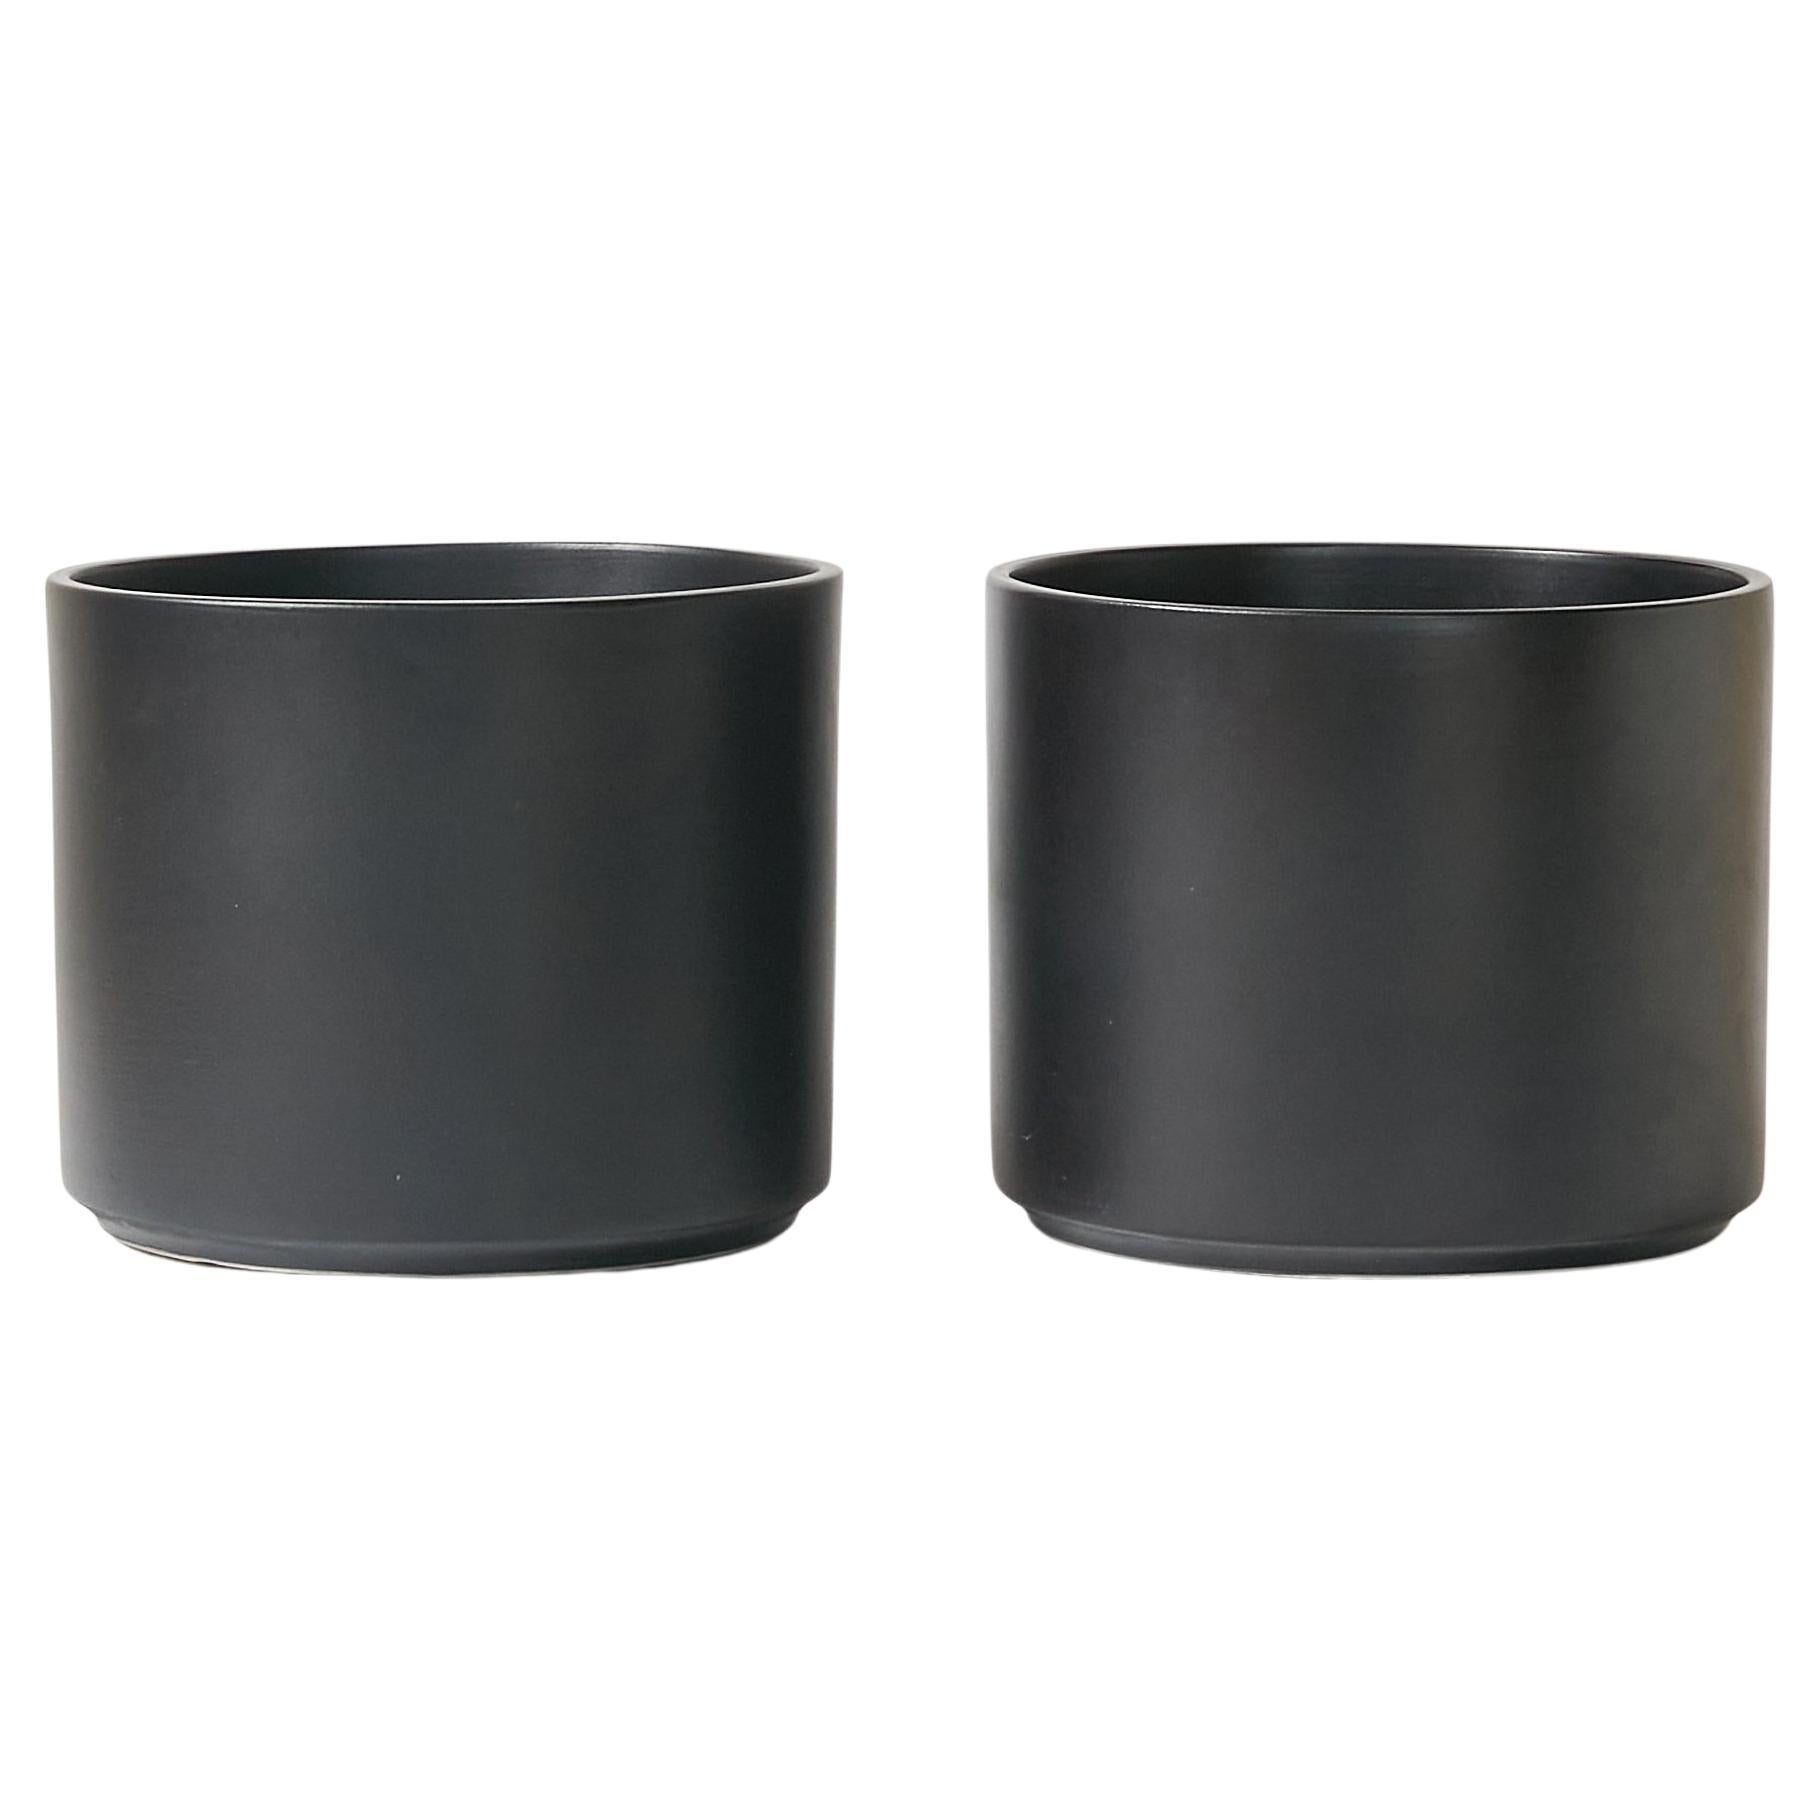 Pair of Gainey Planters in Satin Black Glaze, California Architectural Pottery For Sale